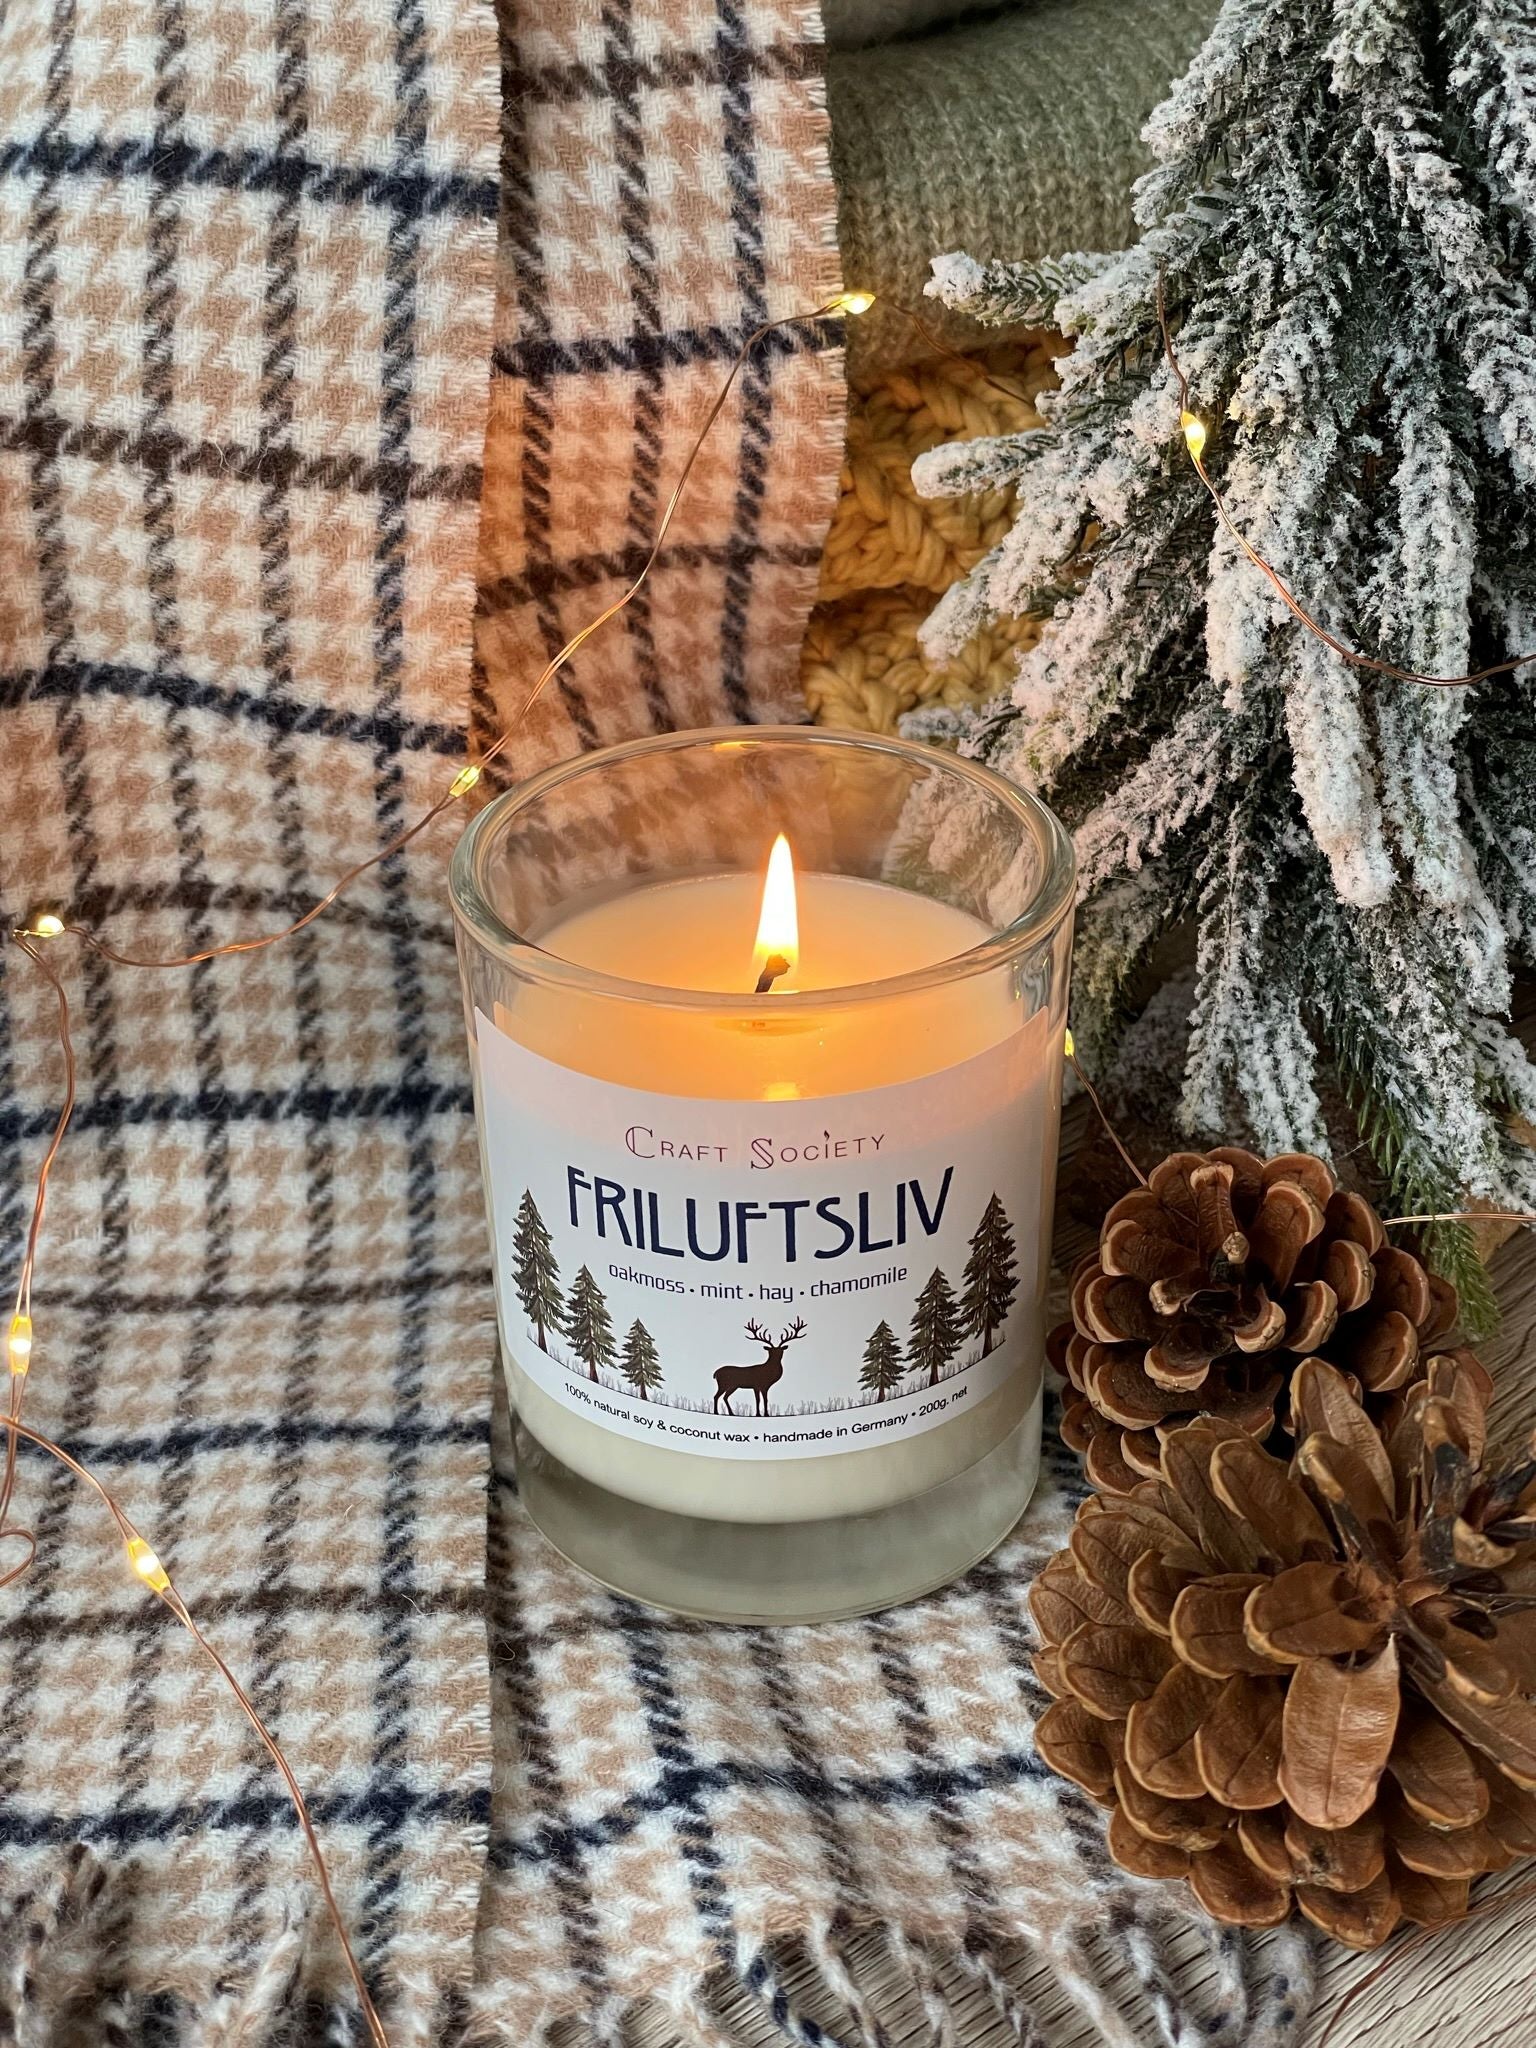 A burning scented candle on a decorated background with pine cones